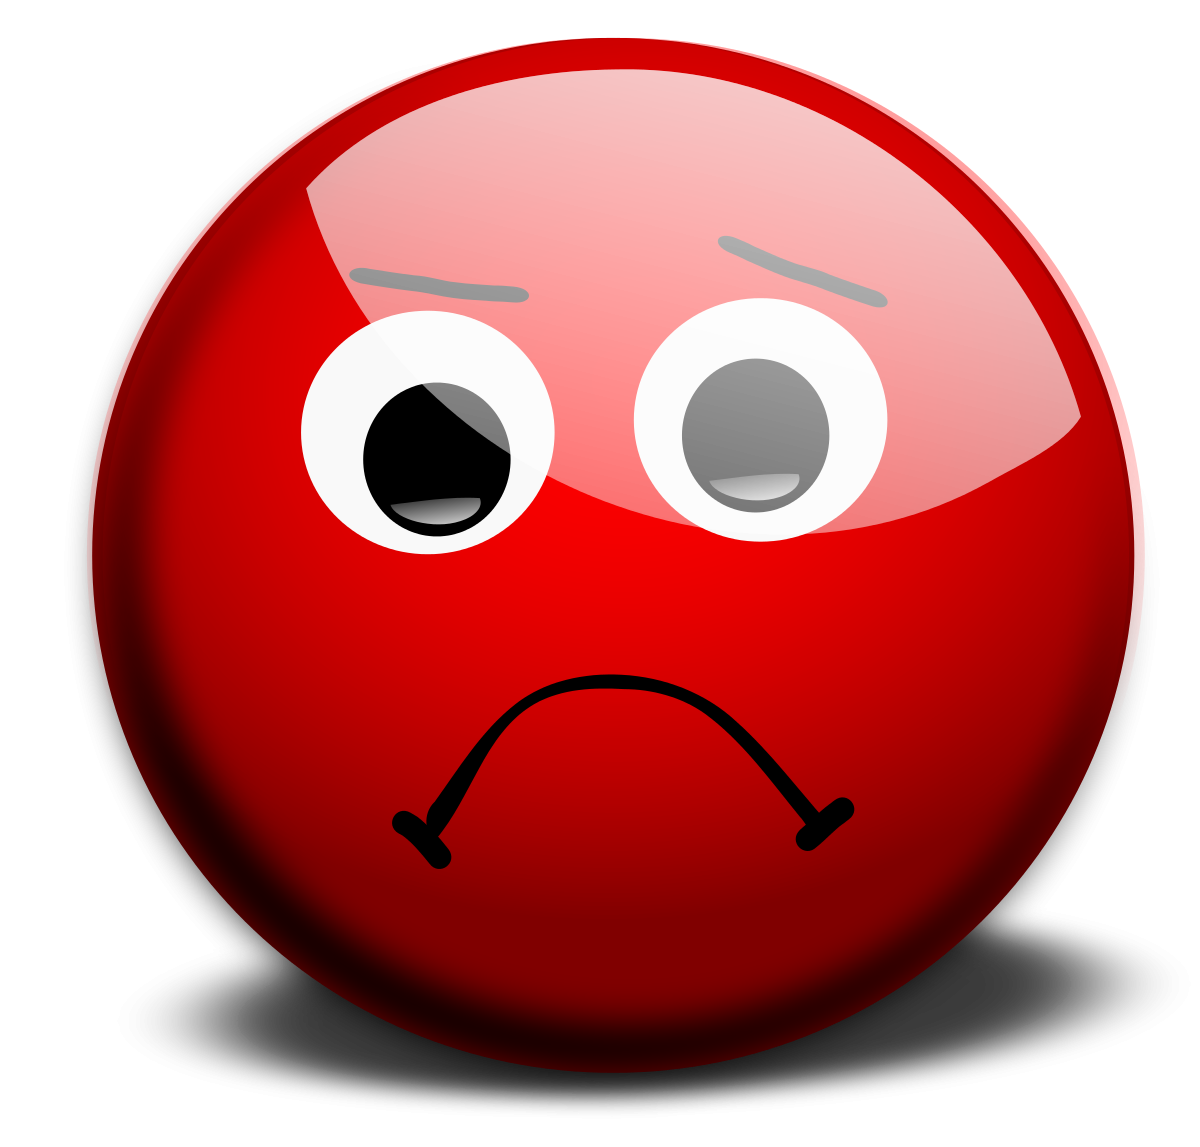 Frowny face clip art